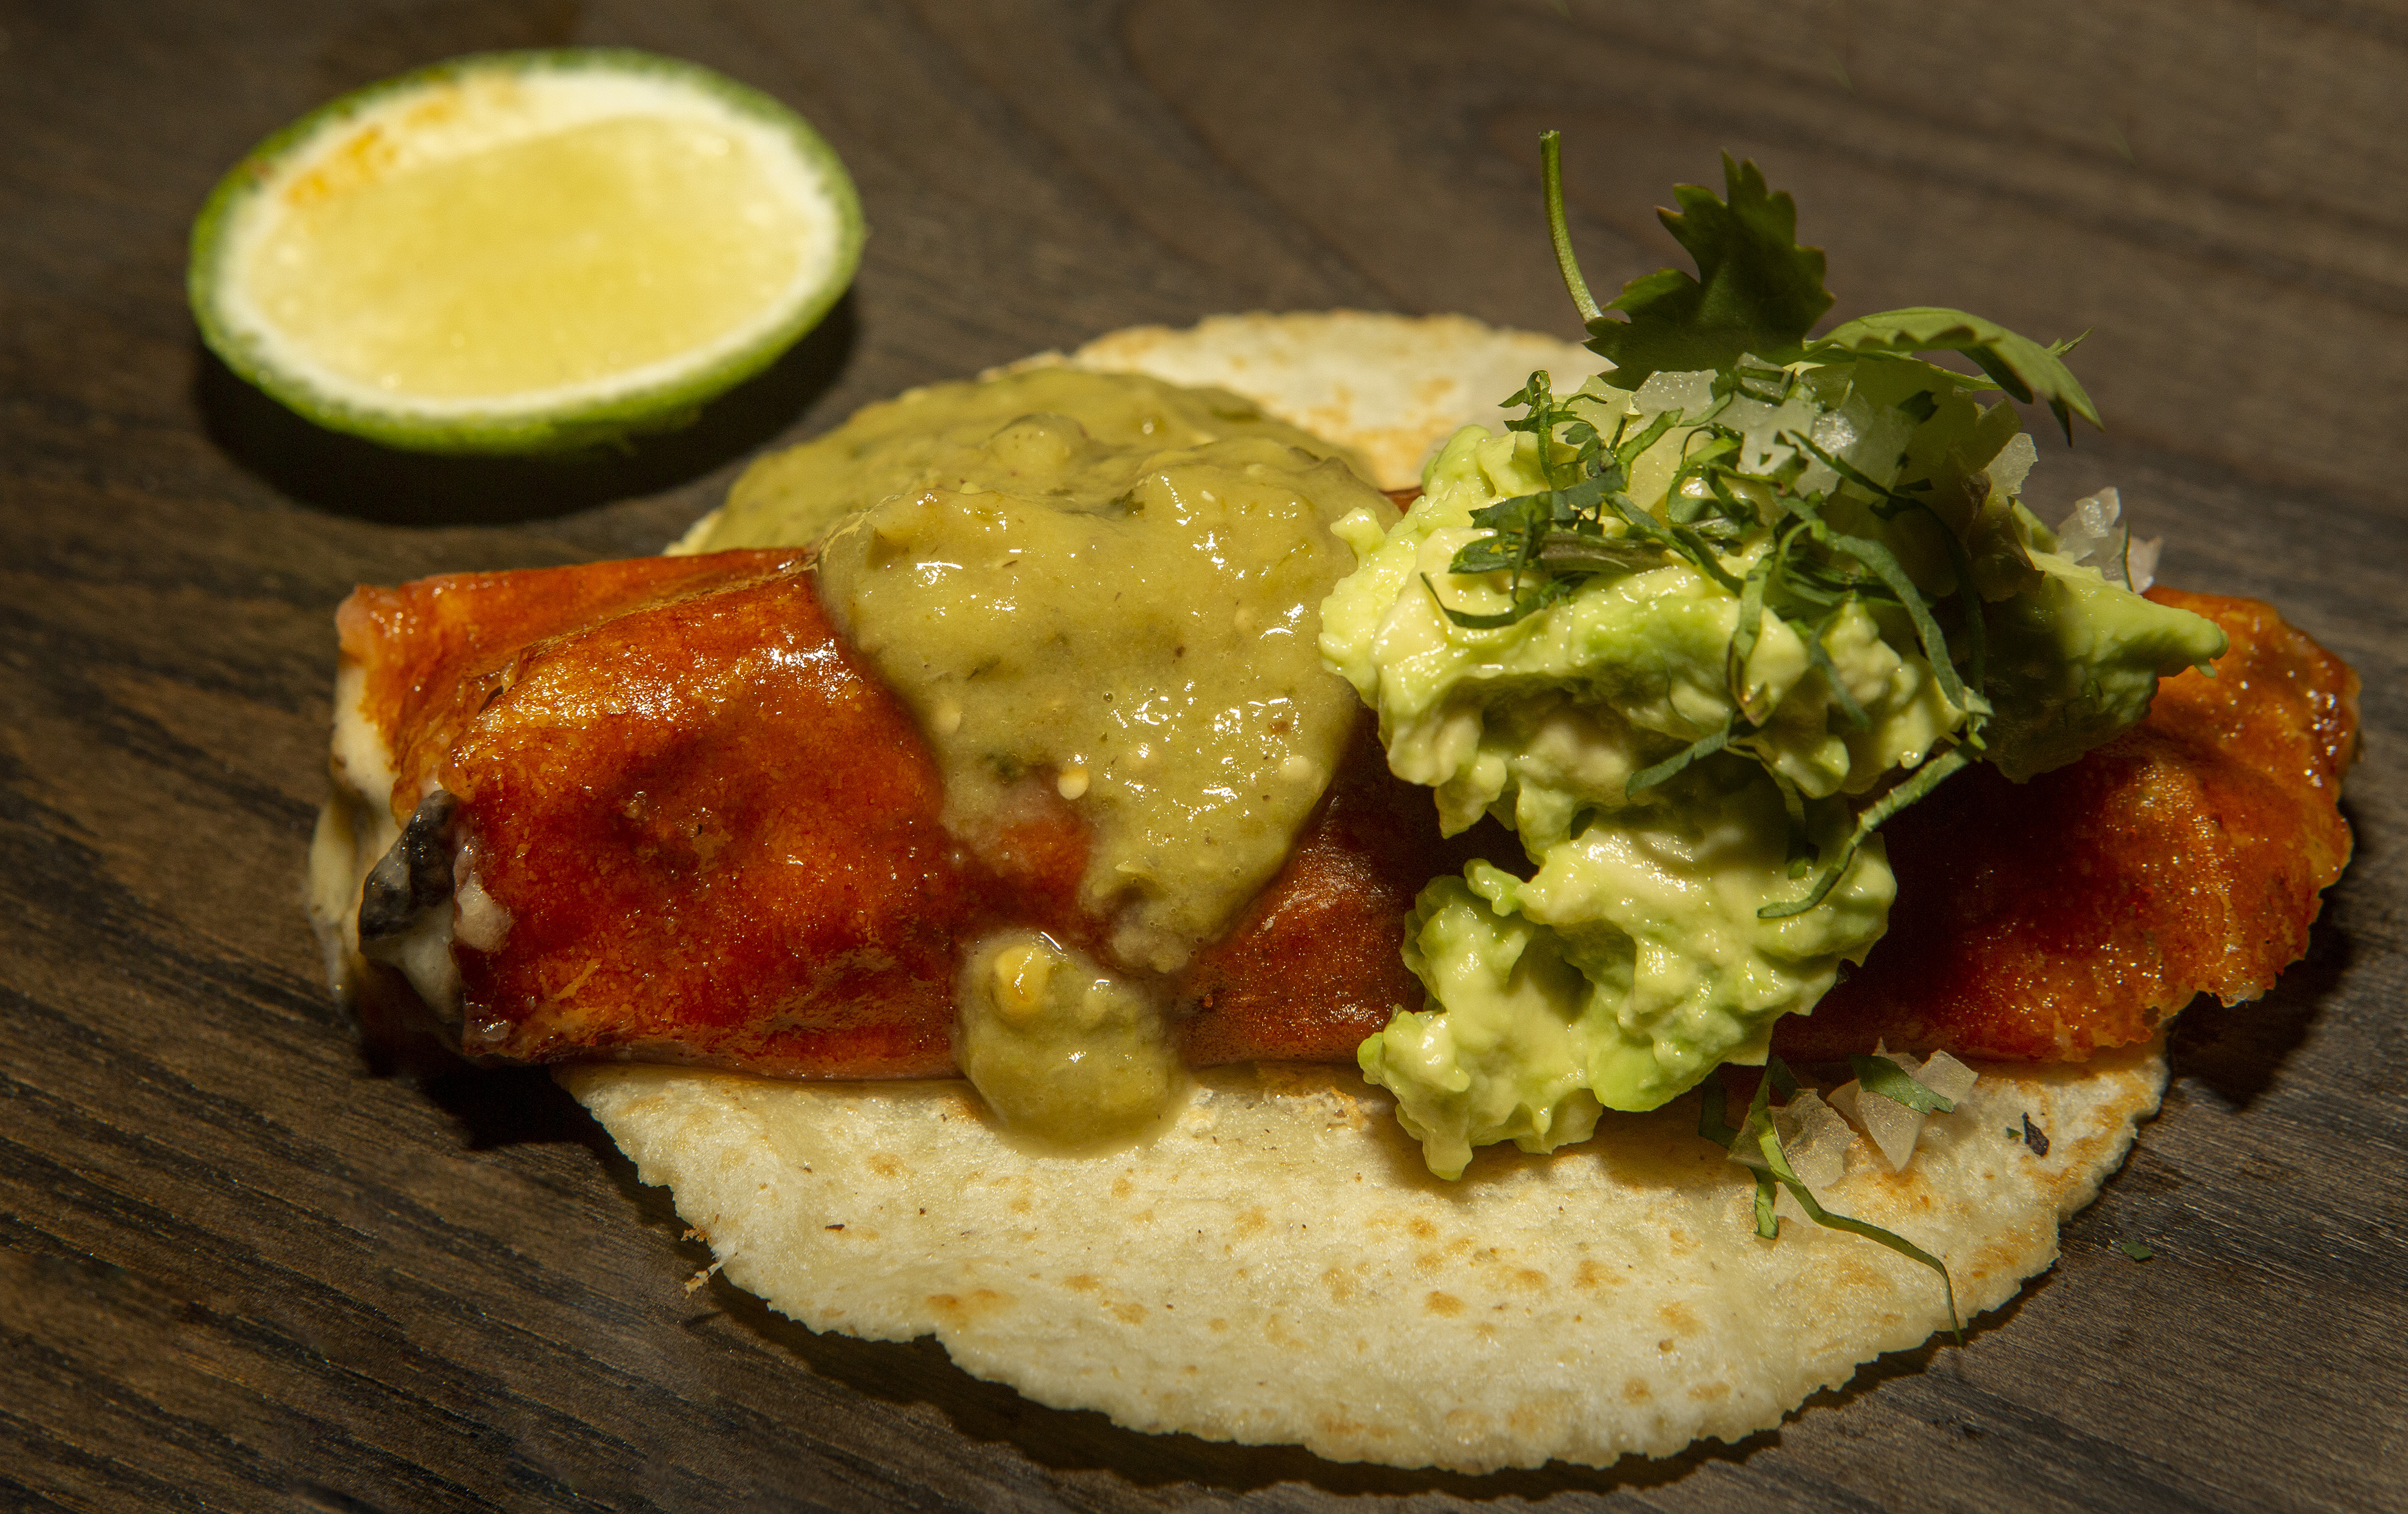 A quesotaco on a tortilla topped with guacamole.